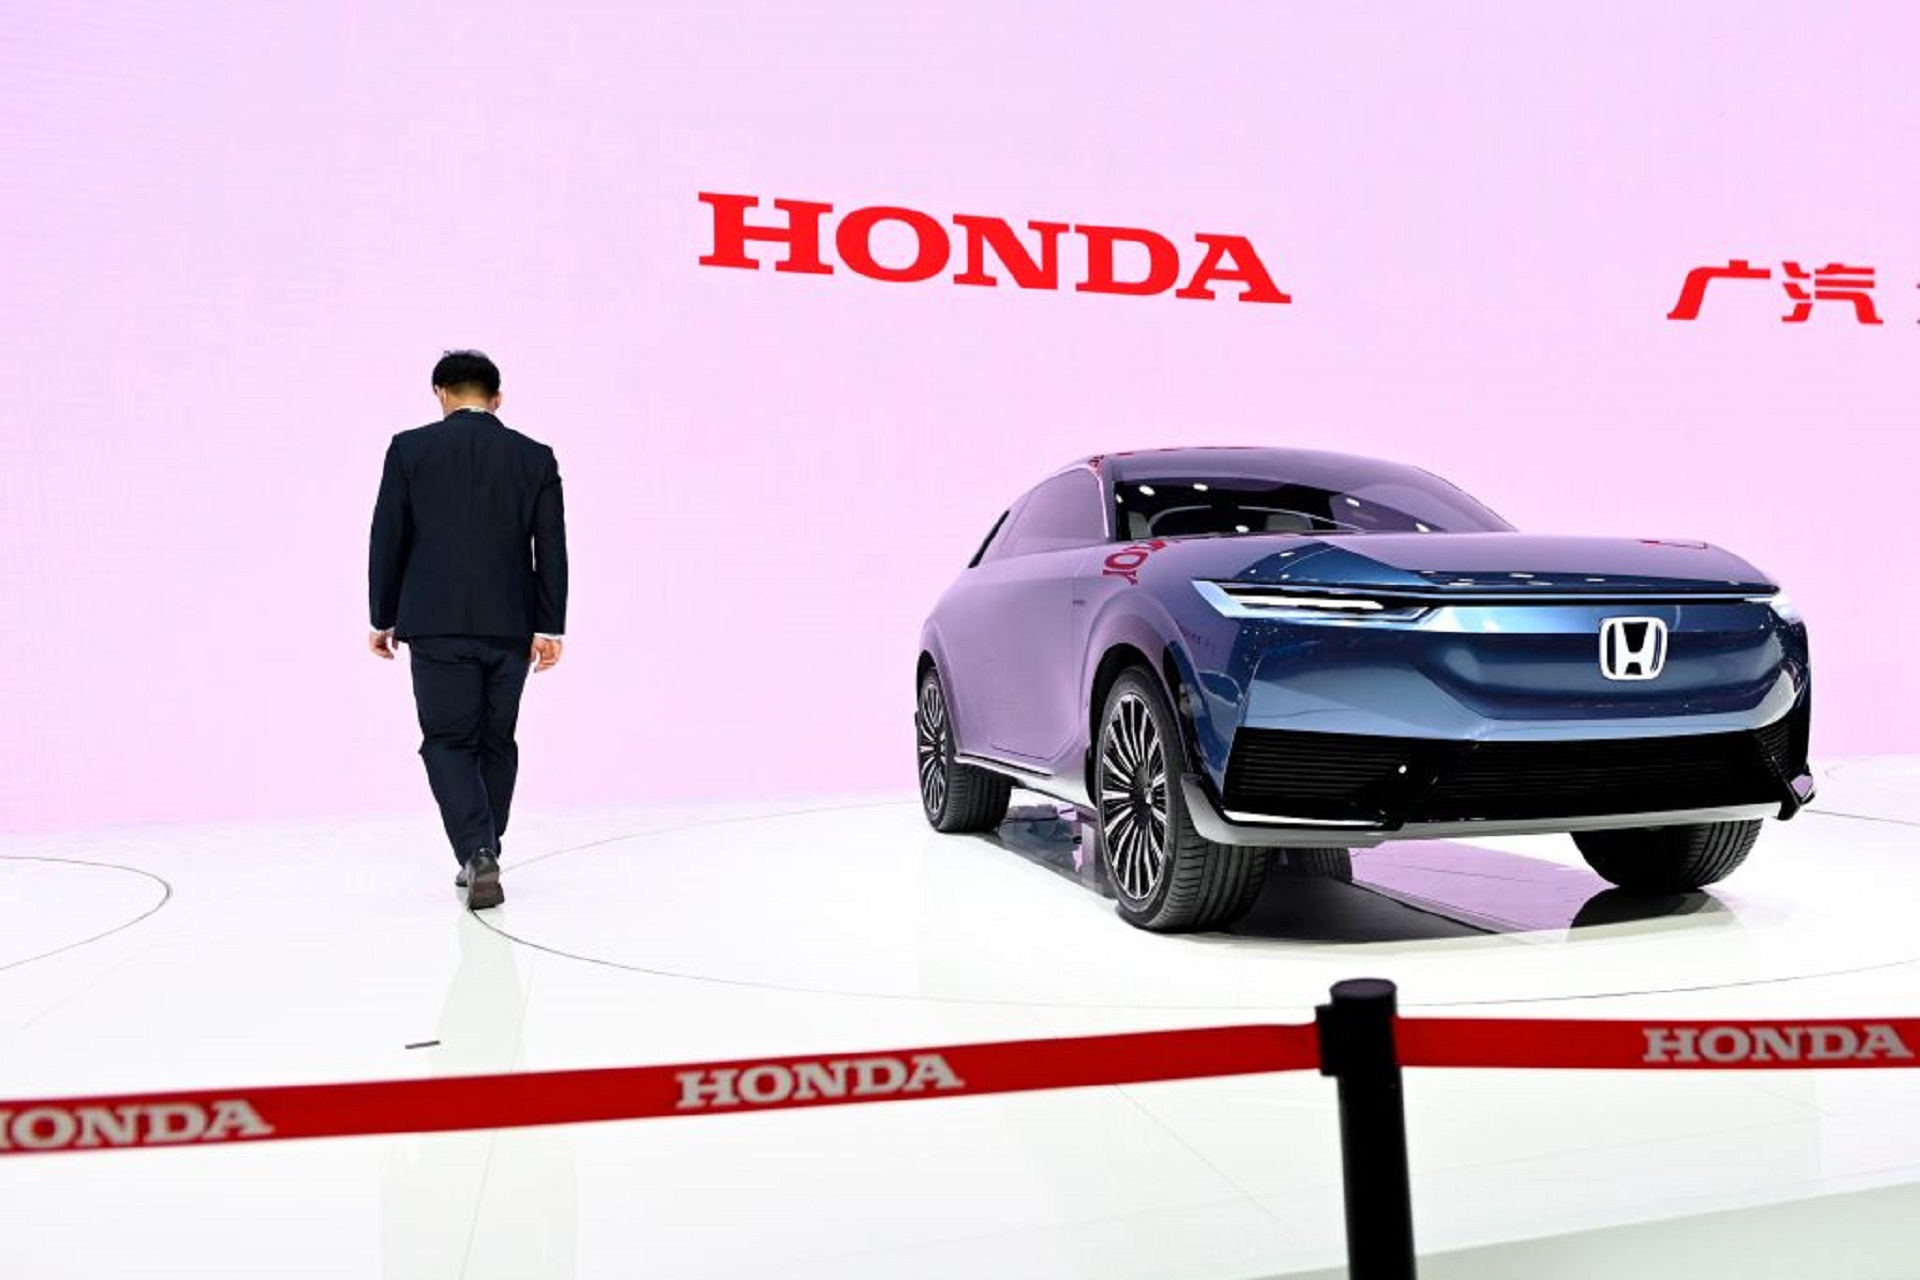 Honda To Invest $64 Bn In R&D, Launch 30 New EV Models By 2030